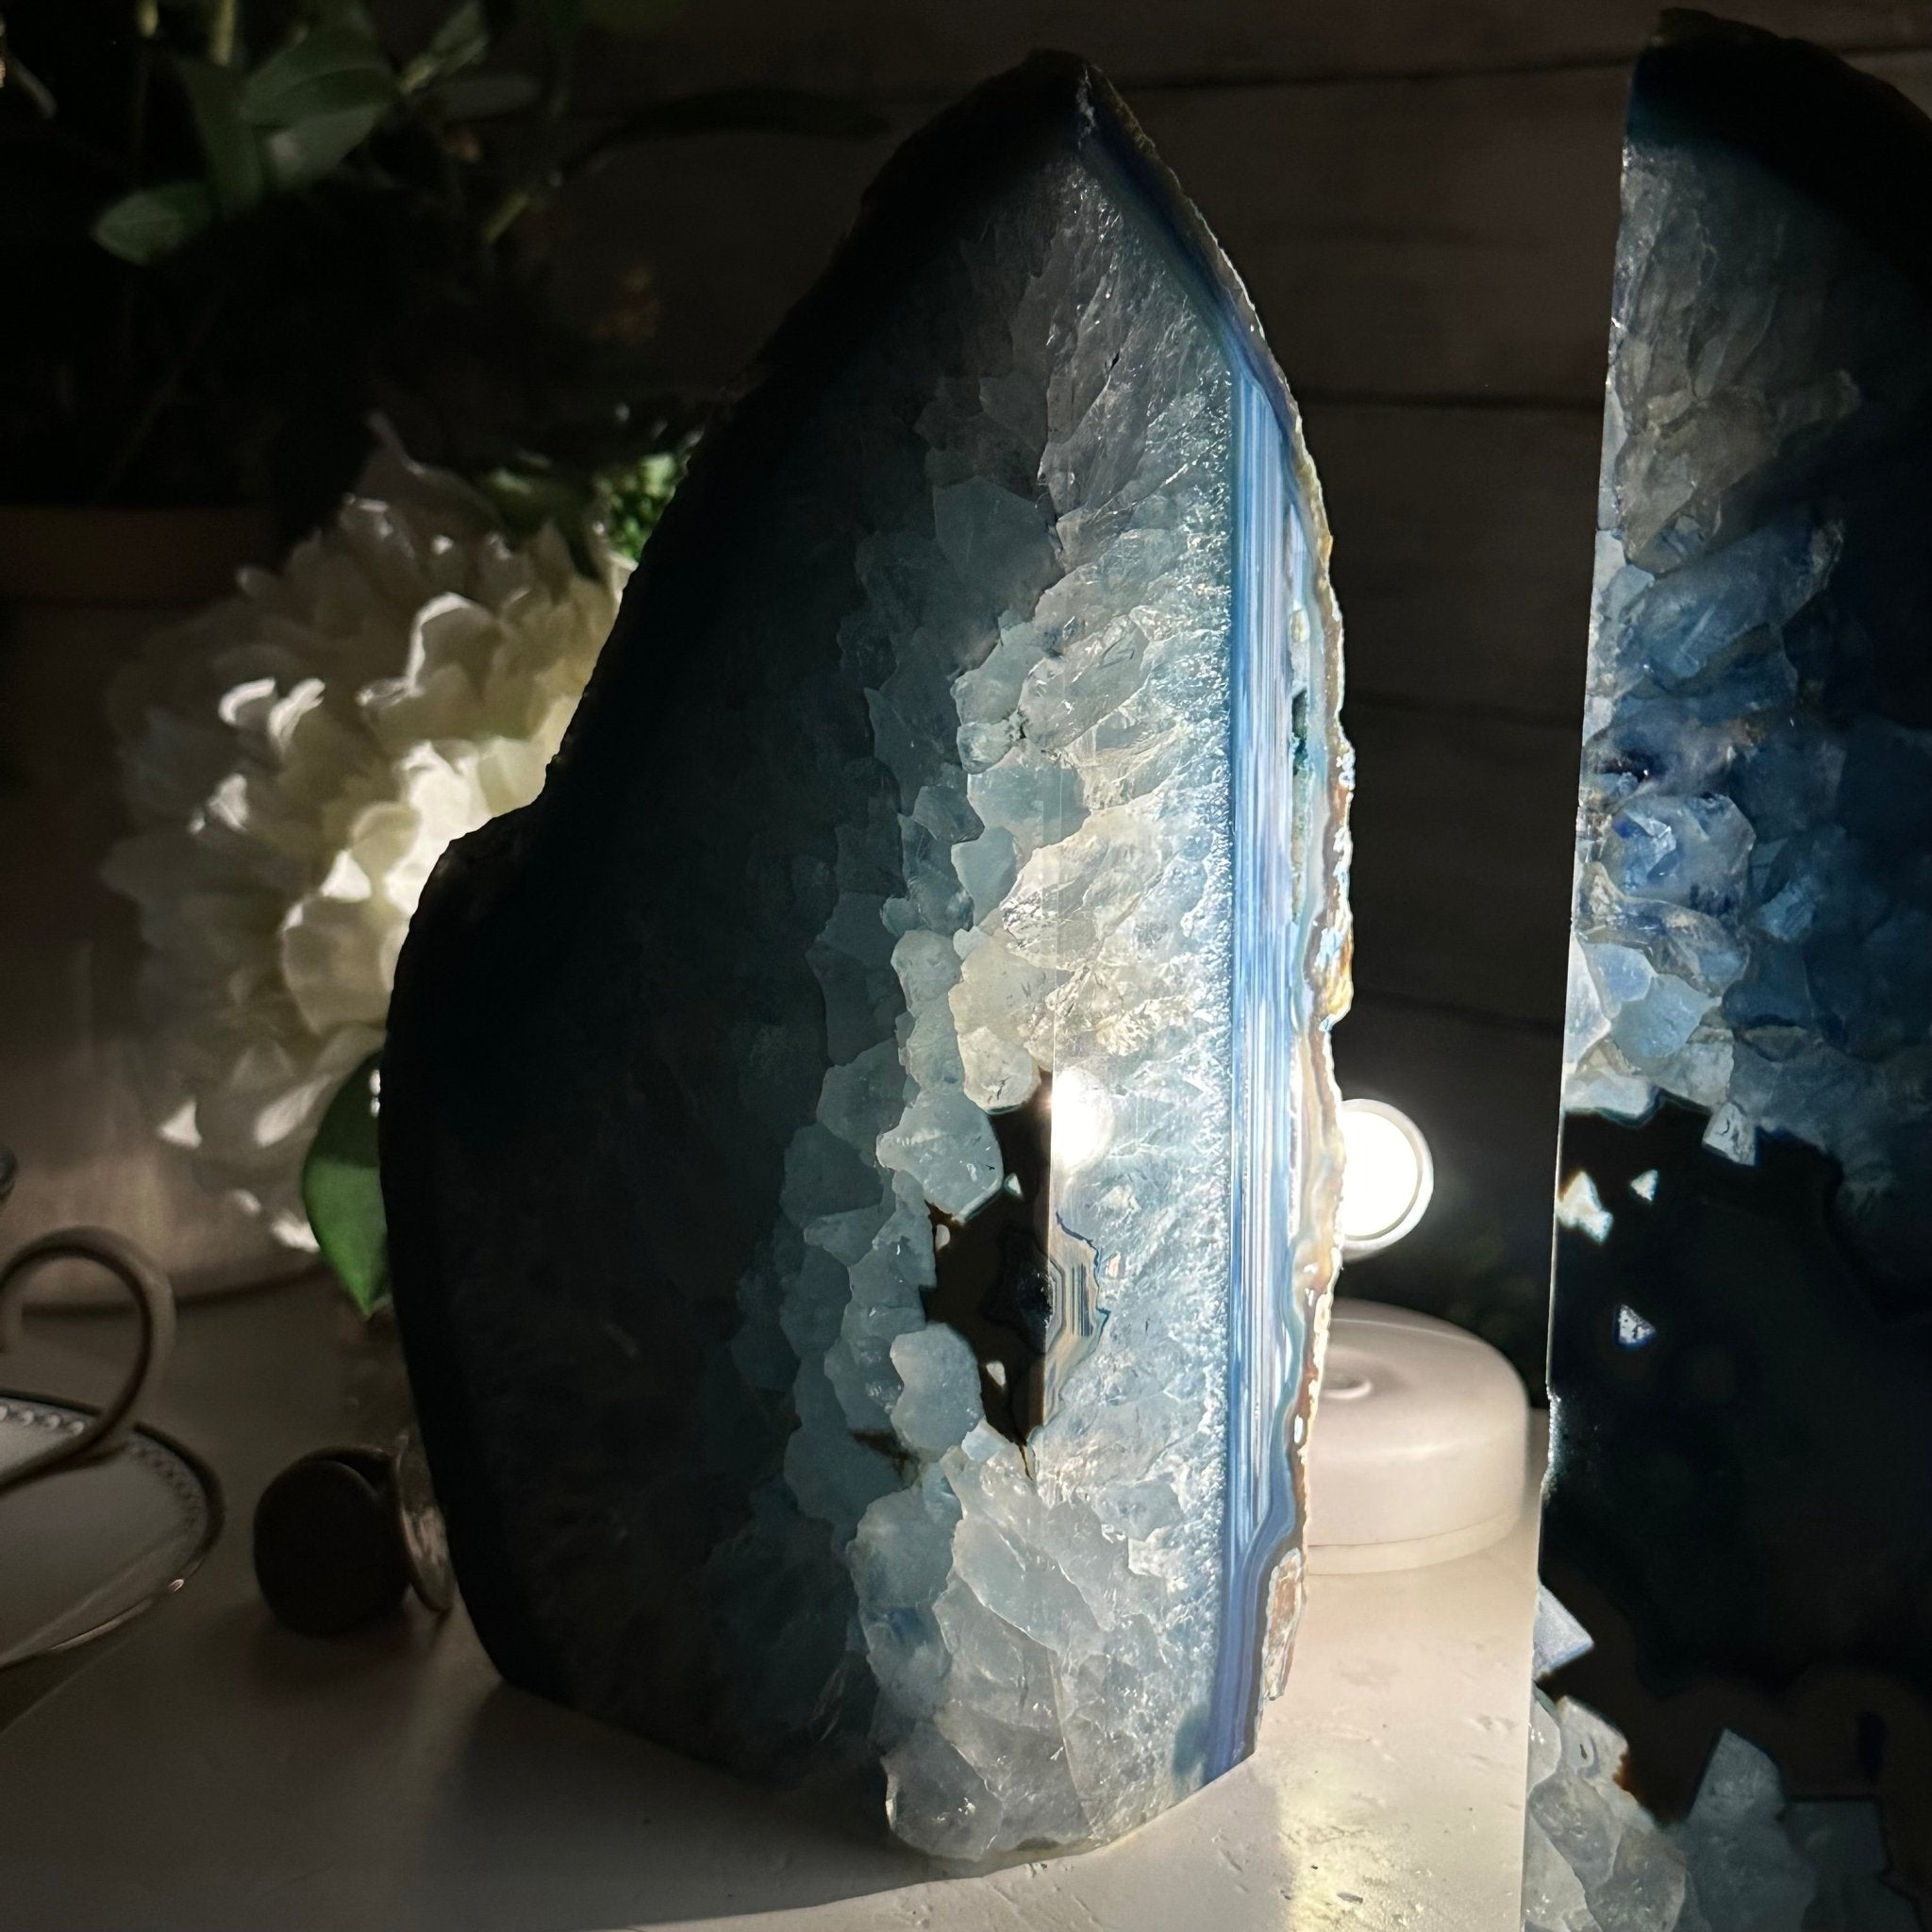 Blue Dyed Brazilian Agate Stone Bookends, 11.8 lbs & 8.5" tall #5151BL-038 - Brazil GemsBrazil GemsBlue Dyed Brazilian Agate Stone Bookends, 11.8 lbs & 8.5" tall #5151BL-038Bookends5151BL-038